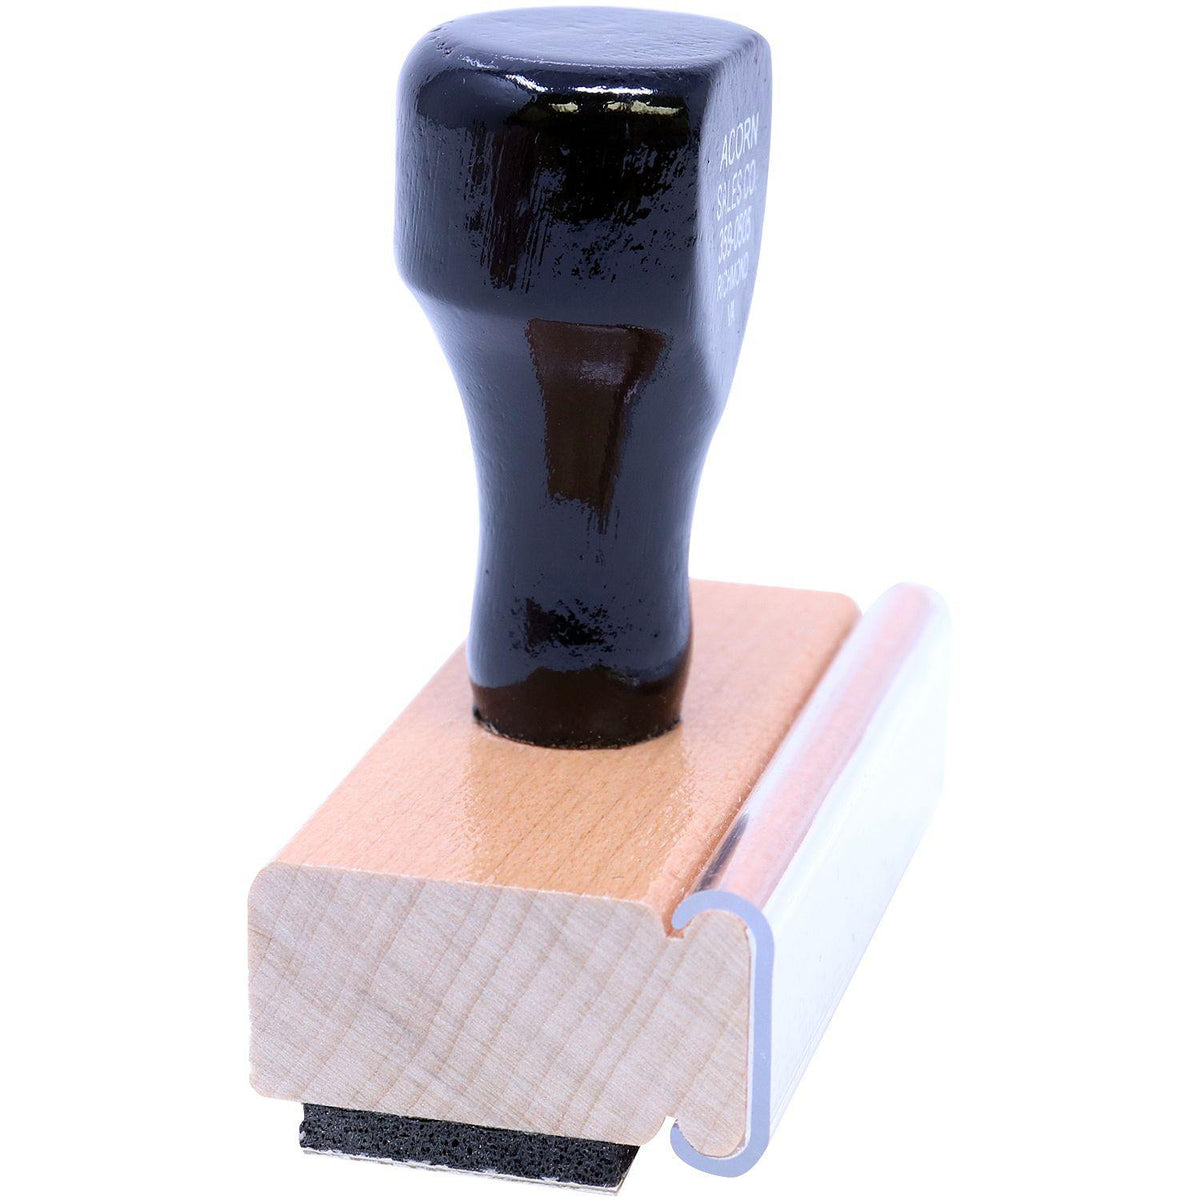 Side View of Large Official Use Only Rubber Stamp at an Angle